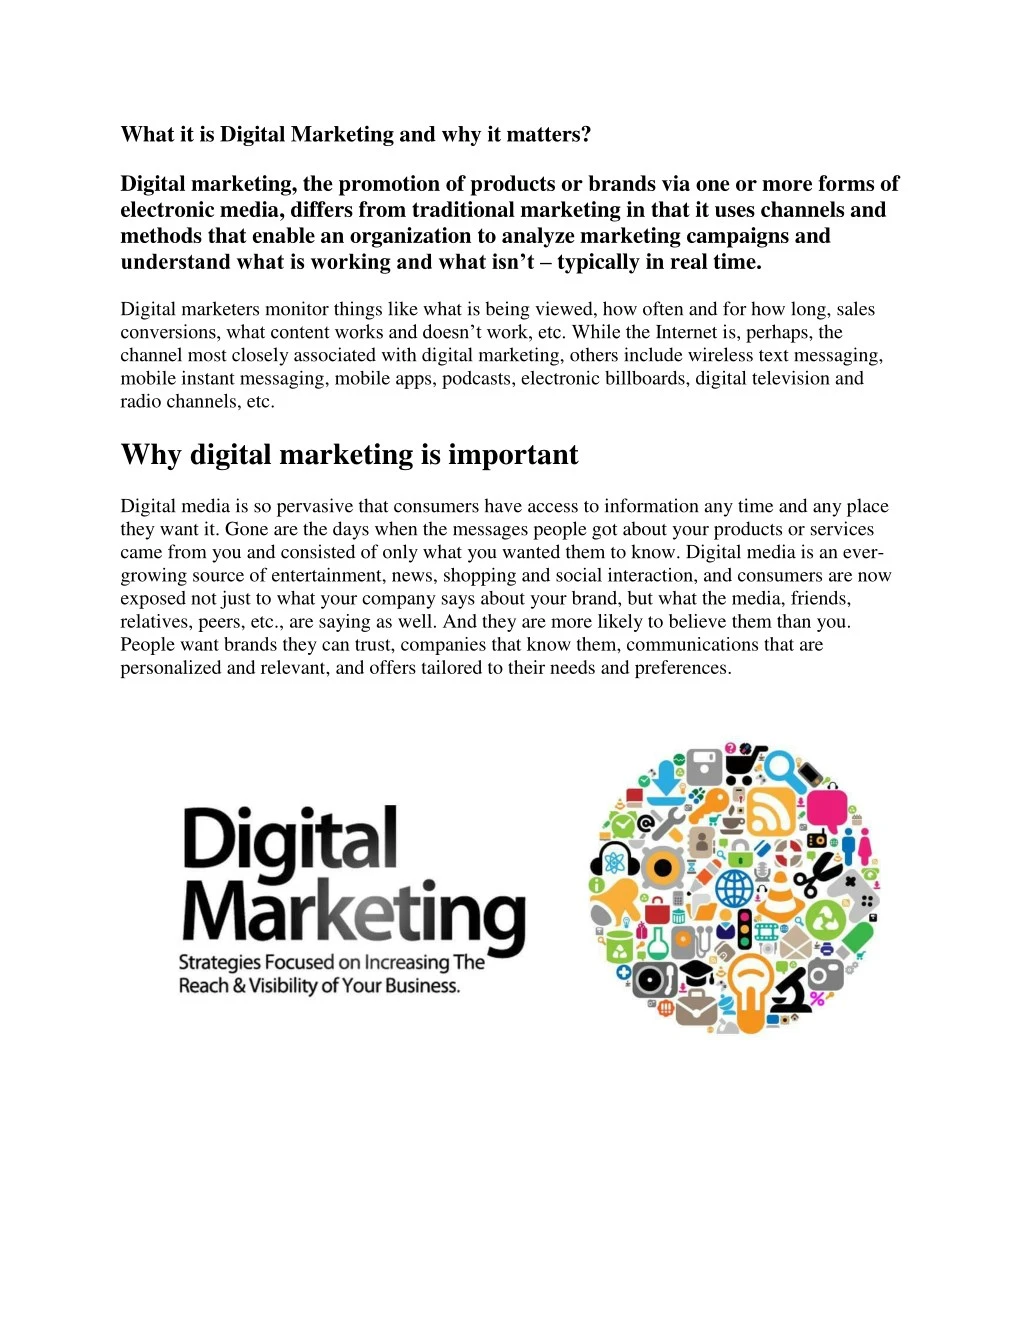 what it is digital marketing and why it matters